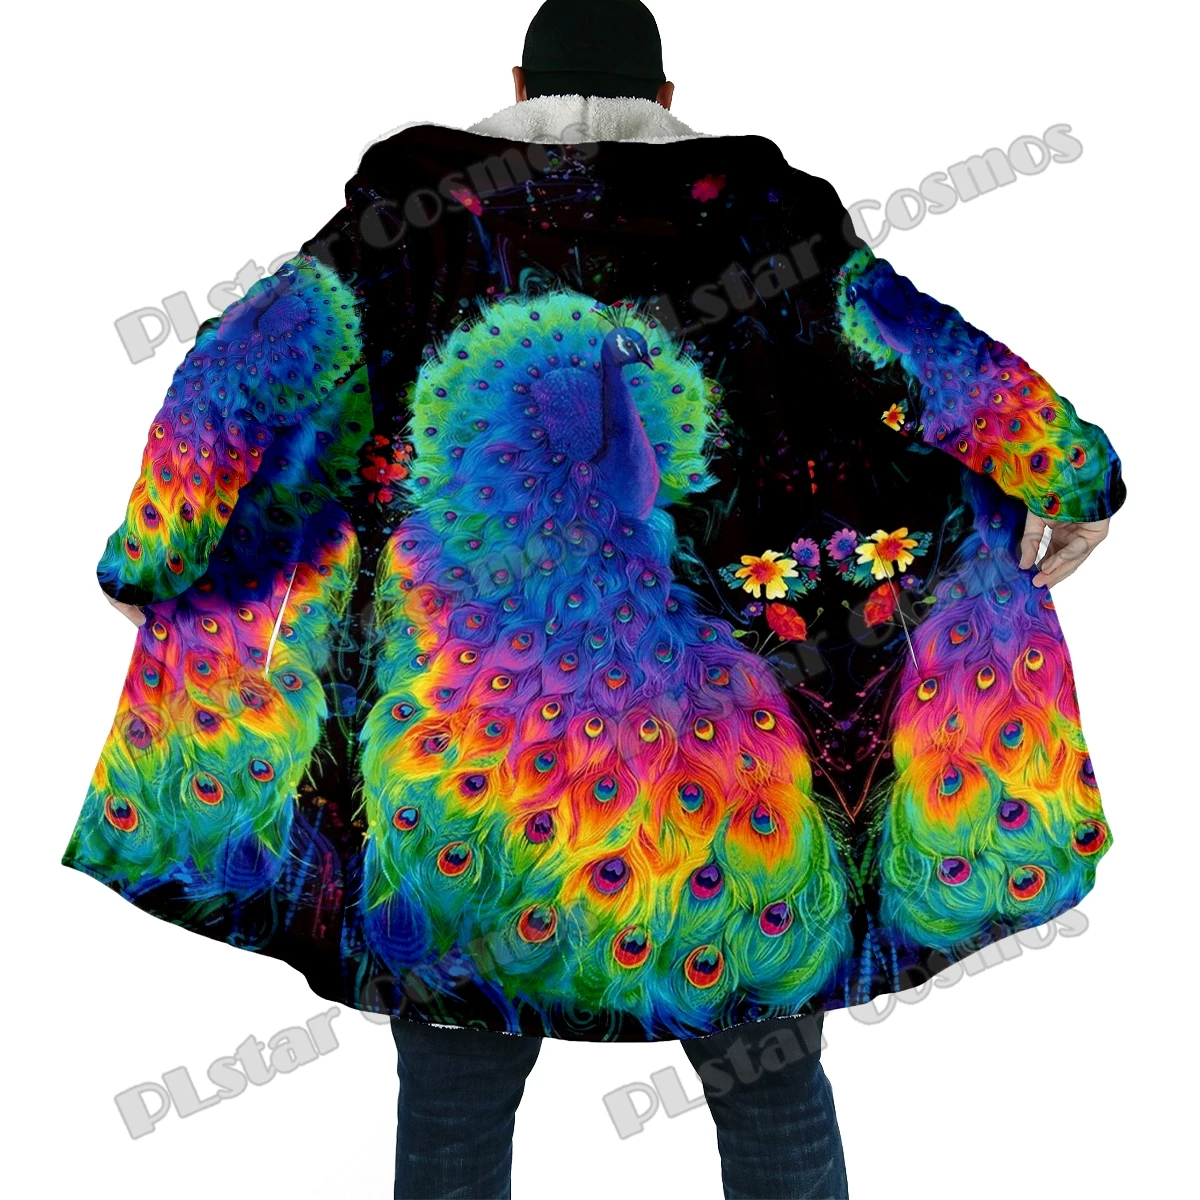 Winter Fashion Men's cloak Peacock And Flowers 3D All Over Printed Thick Fleece Hooded Cloak Unisex Casual Warm Cape Coat DP41